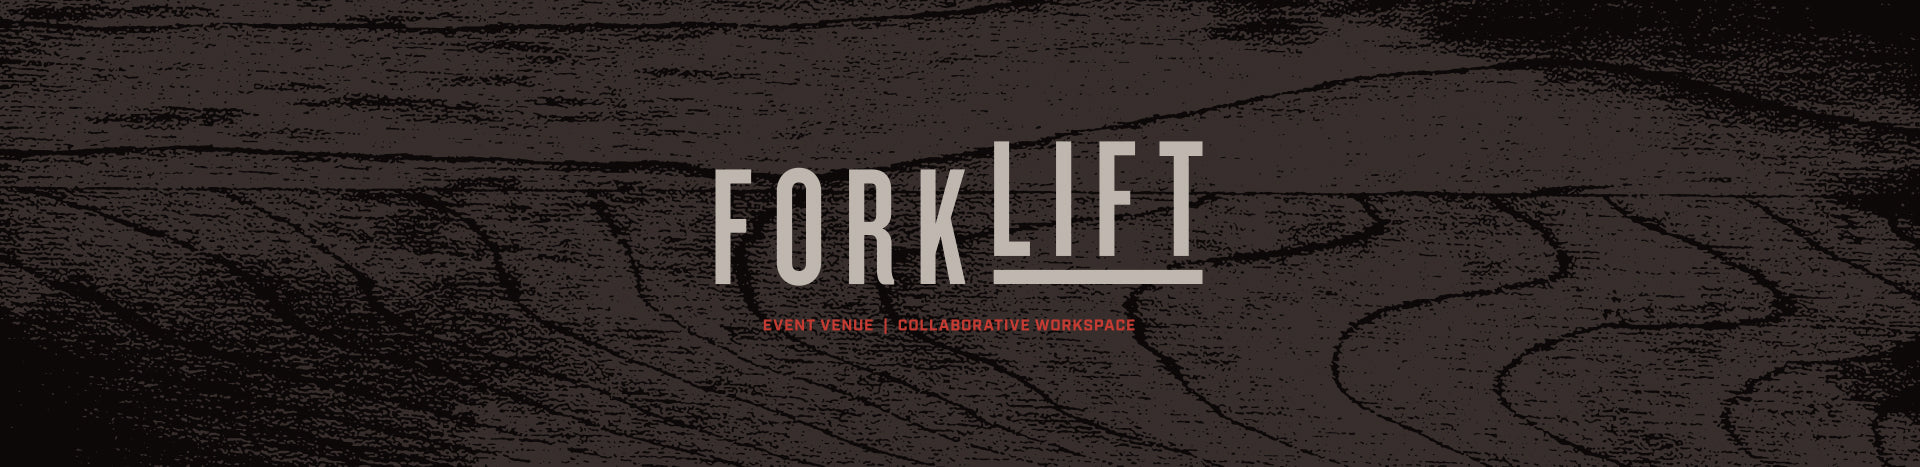 Classes / Events @ FORKLIFT